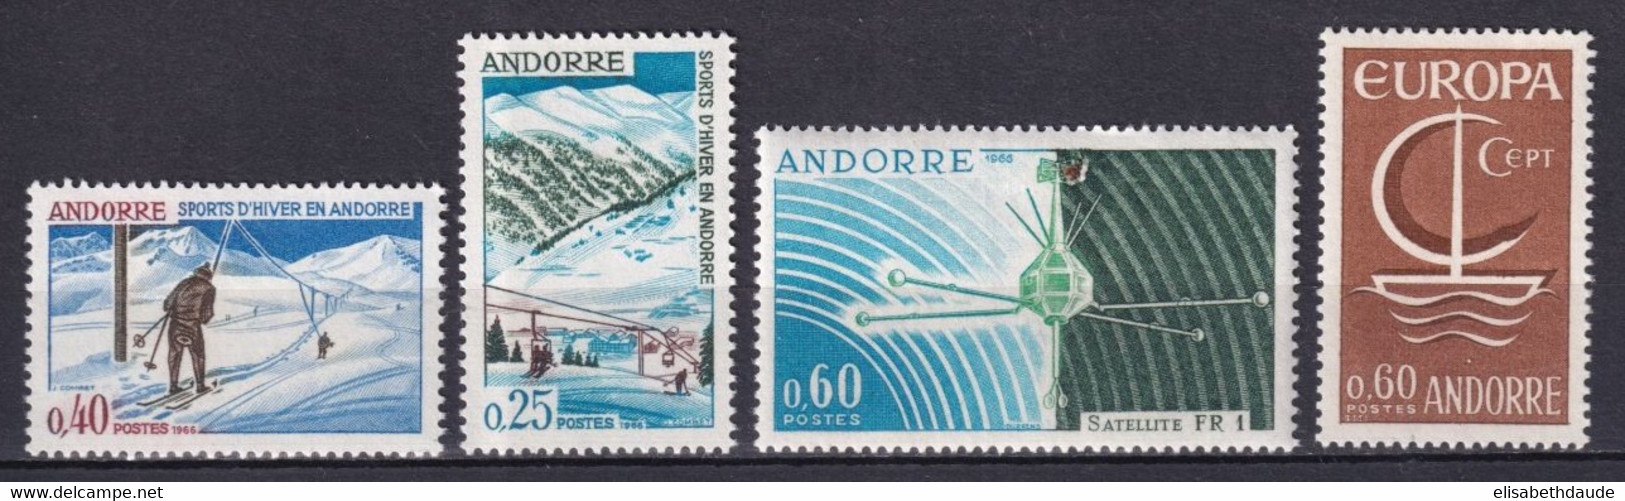 ANDORRE - ANNEE COMPLETE 1966 YVERT N° 175/178 ** MNH - COTE = 10.9 EUR. - - Annate Complete